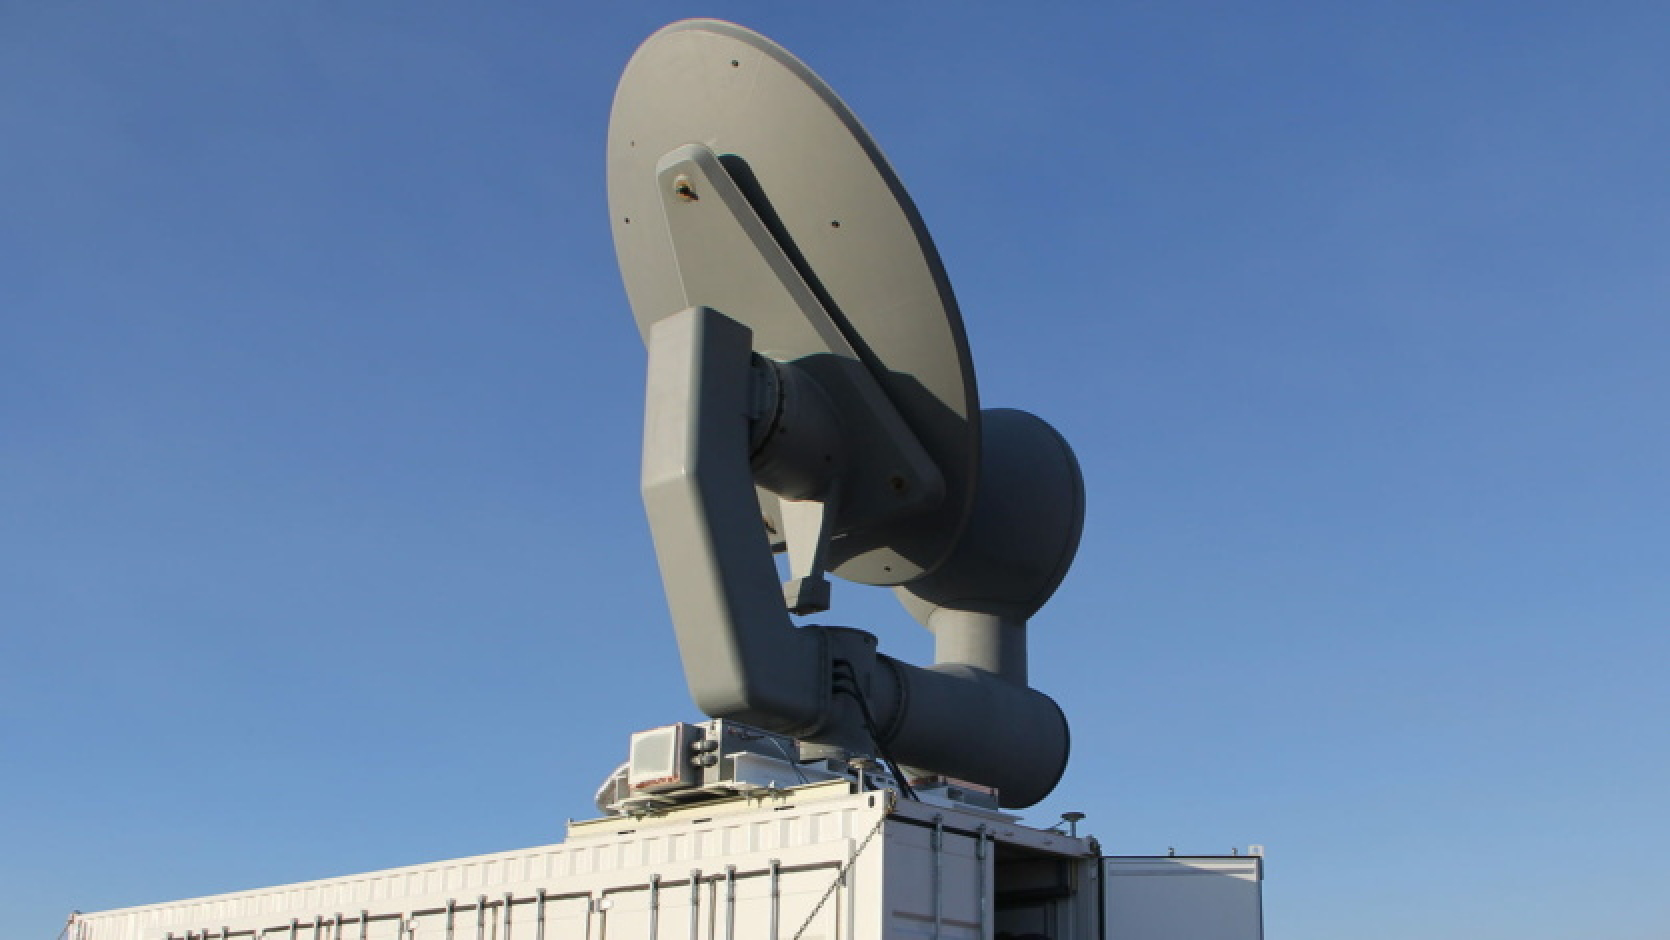 RTX CHIMERA - a powerful microwave weapon for shooting down drones has passed a critical test